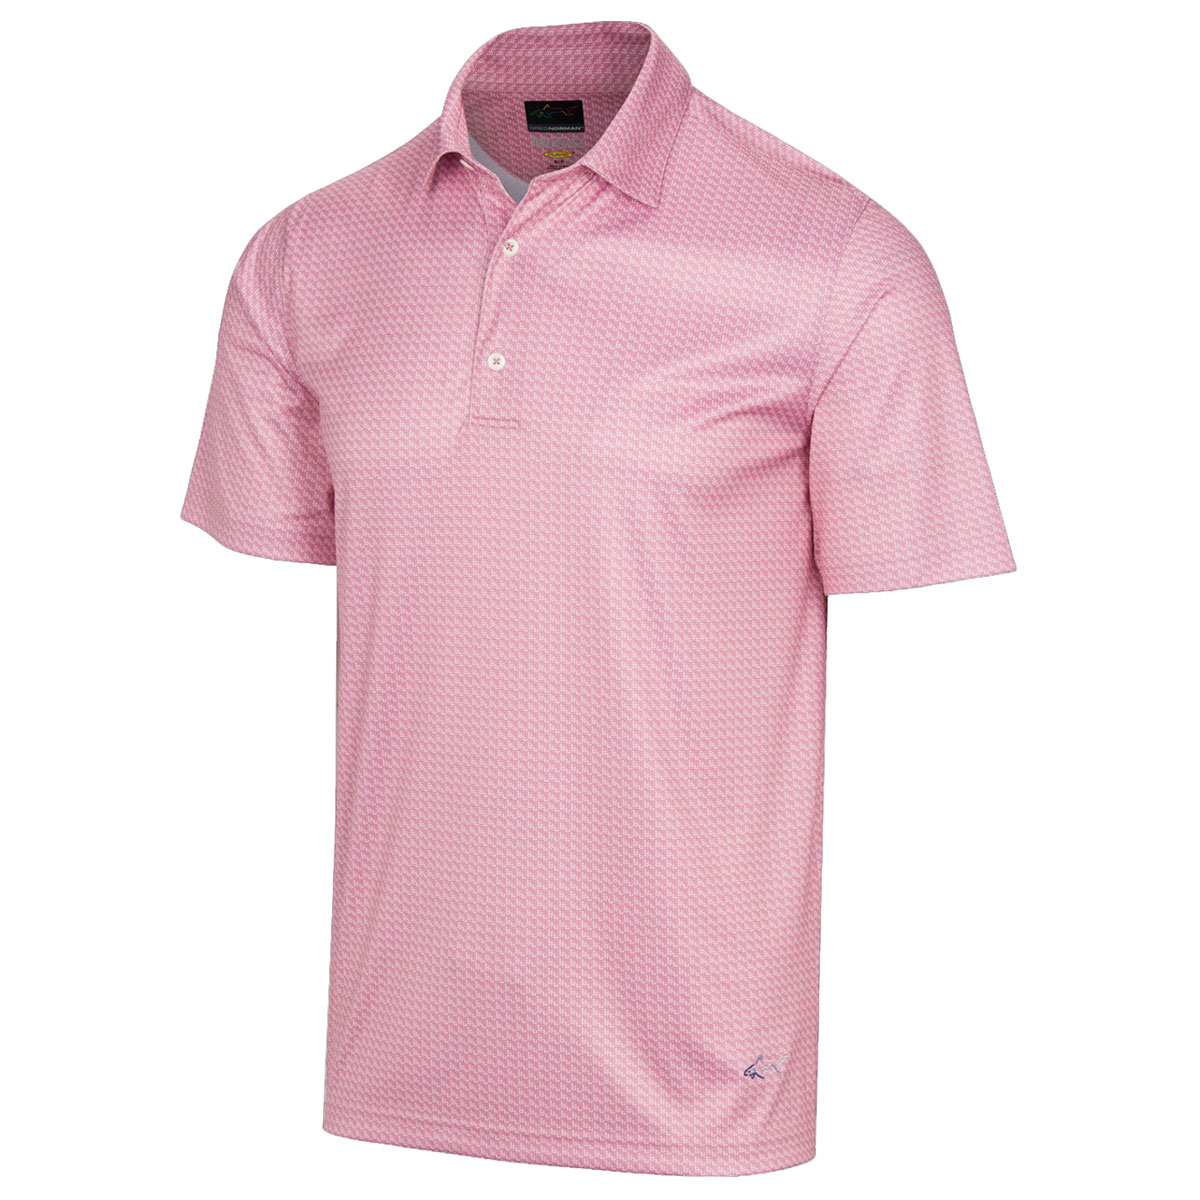 Greg Norman Men's ML75 Microlux Whale Tail Print Golf Polo Shirt from ...